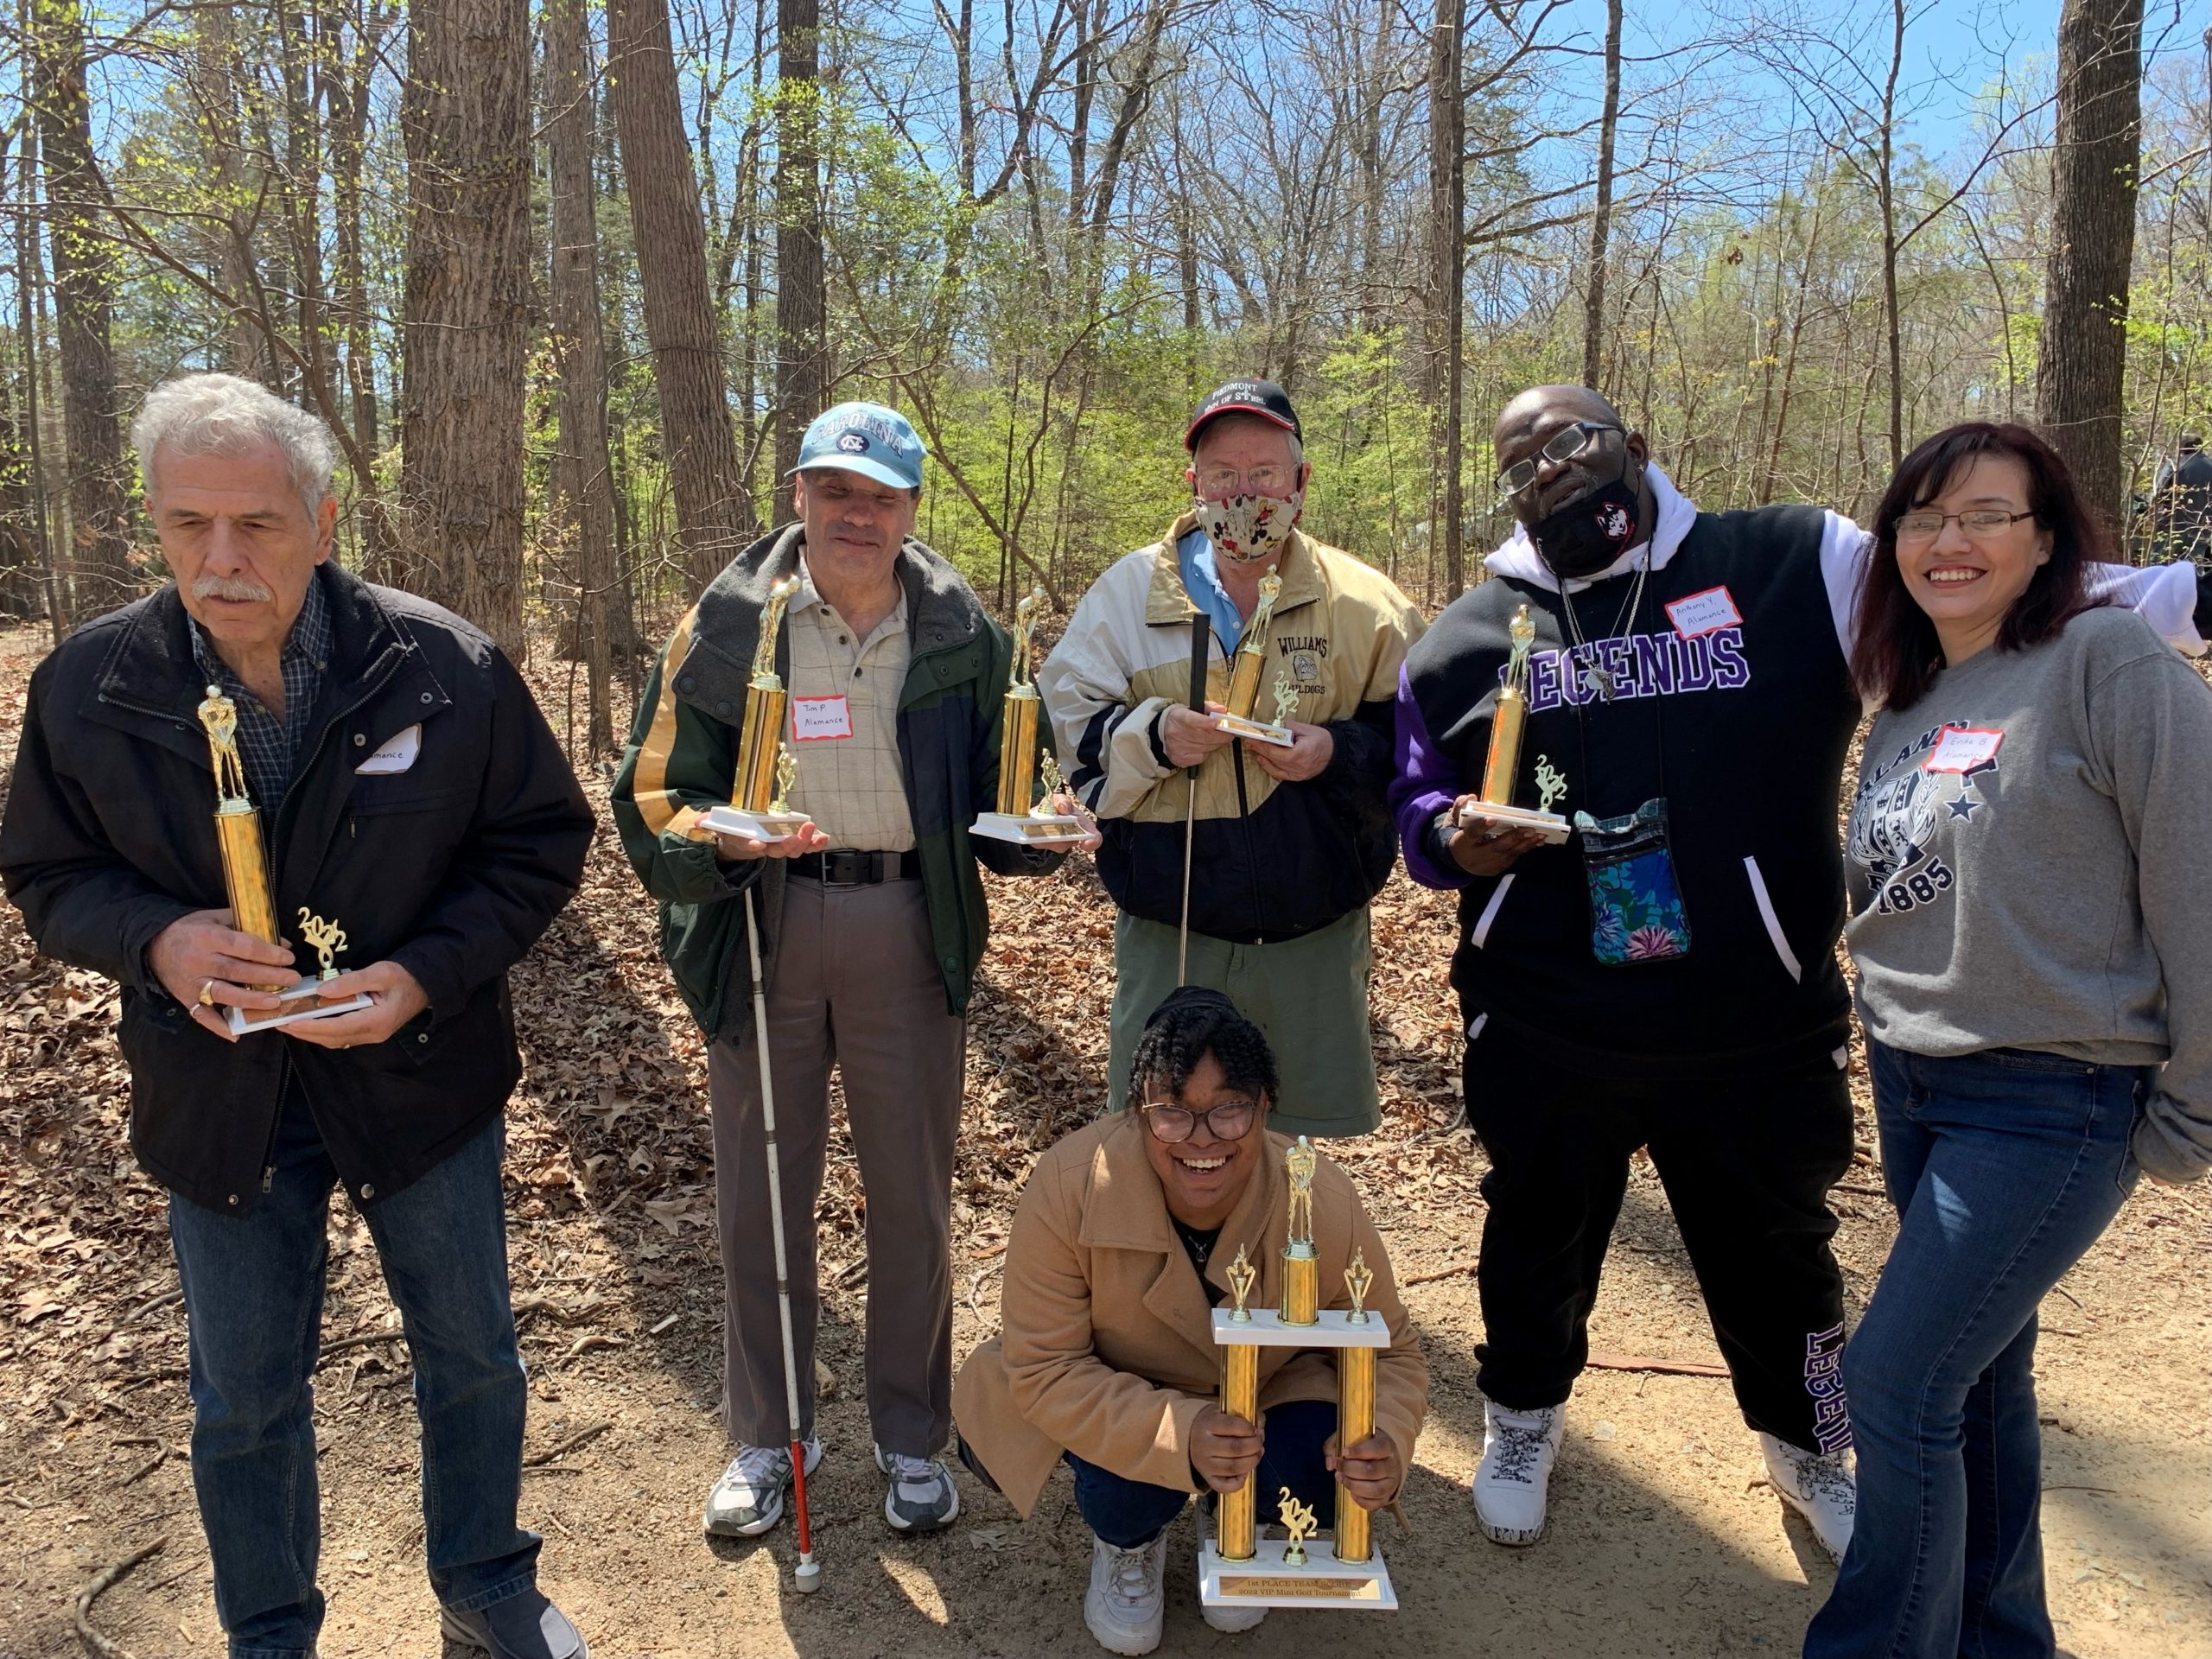 4 Visually Impaired Program participants hold trophies received at a putt putt tournament 